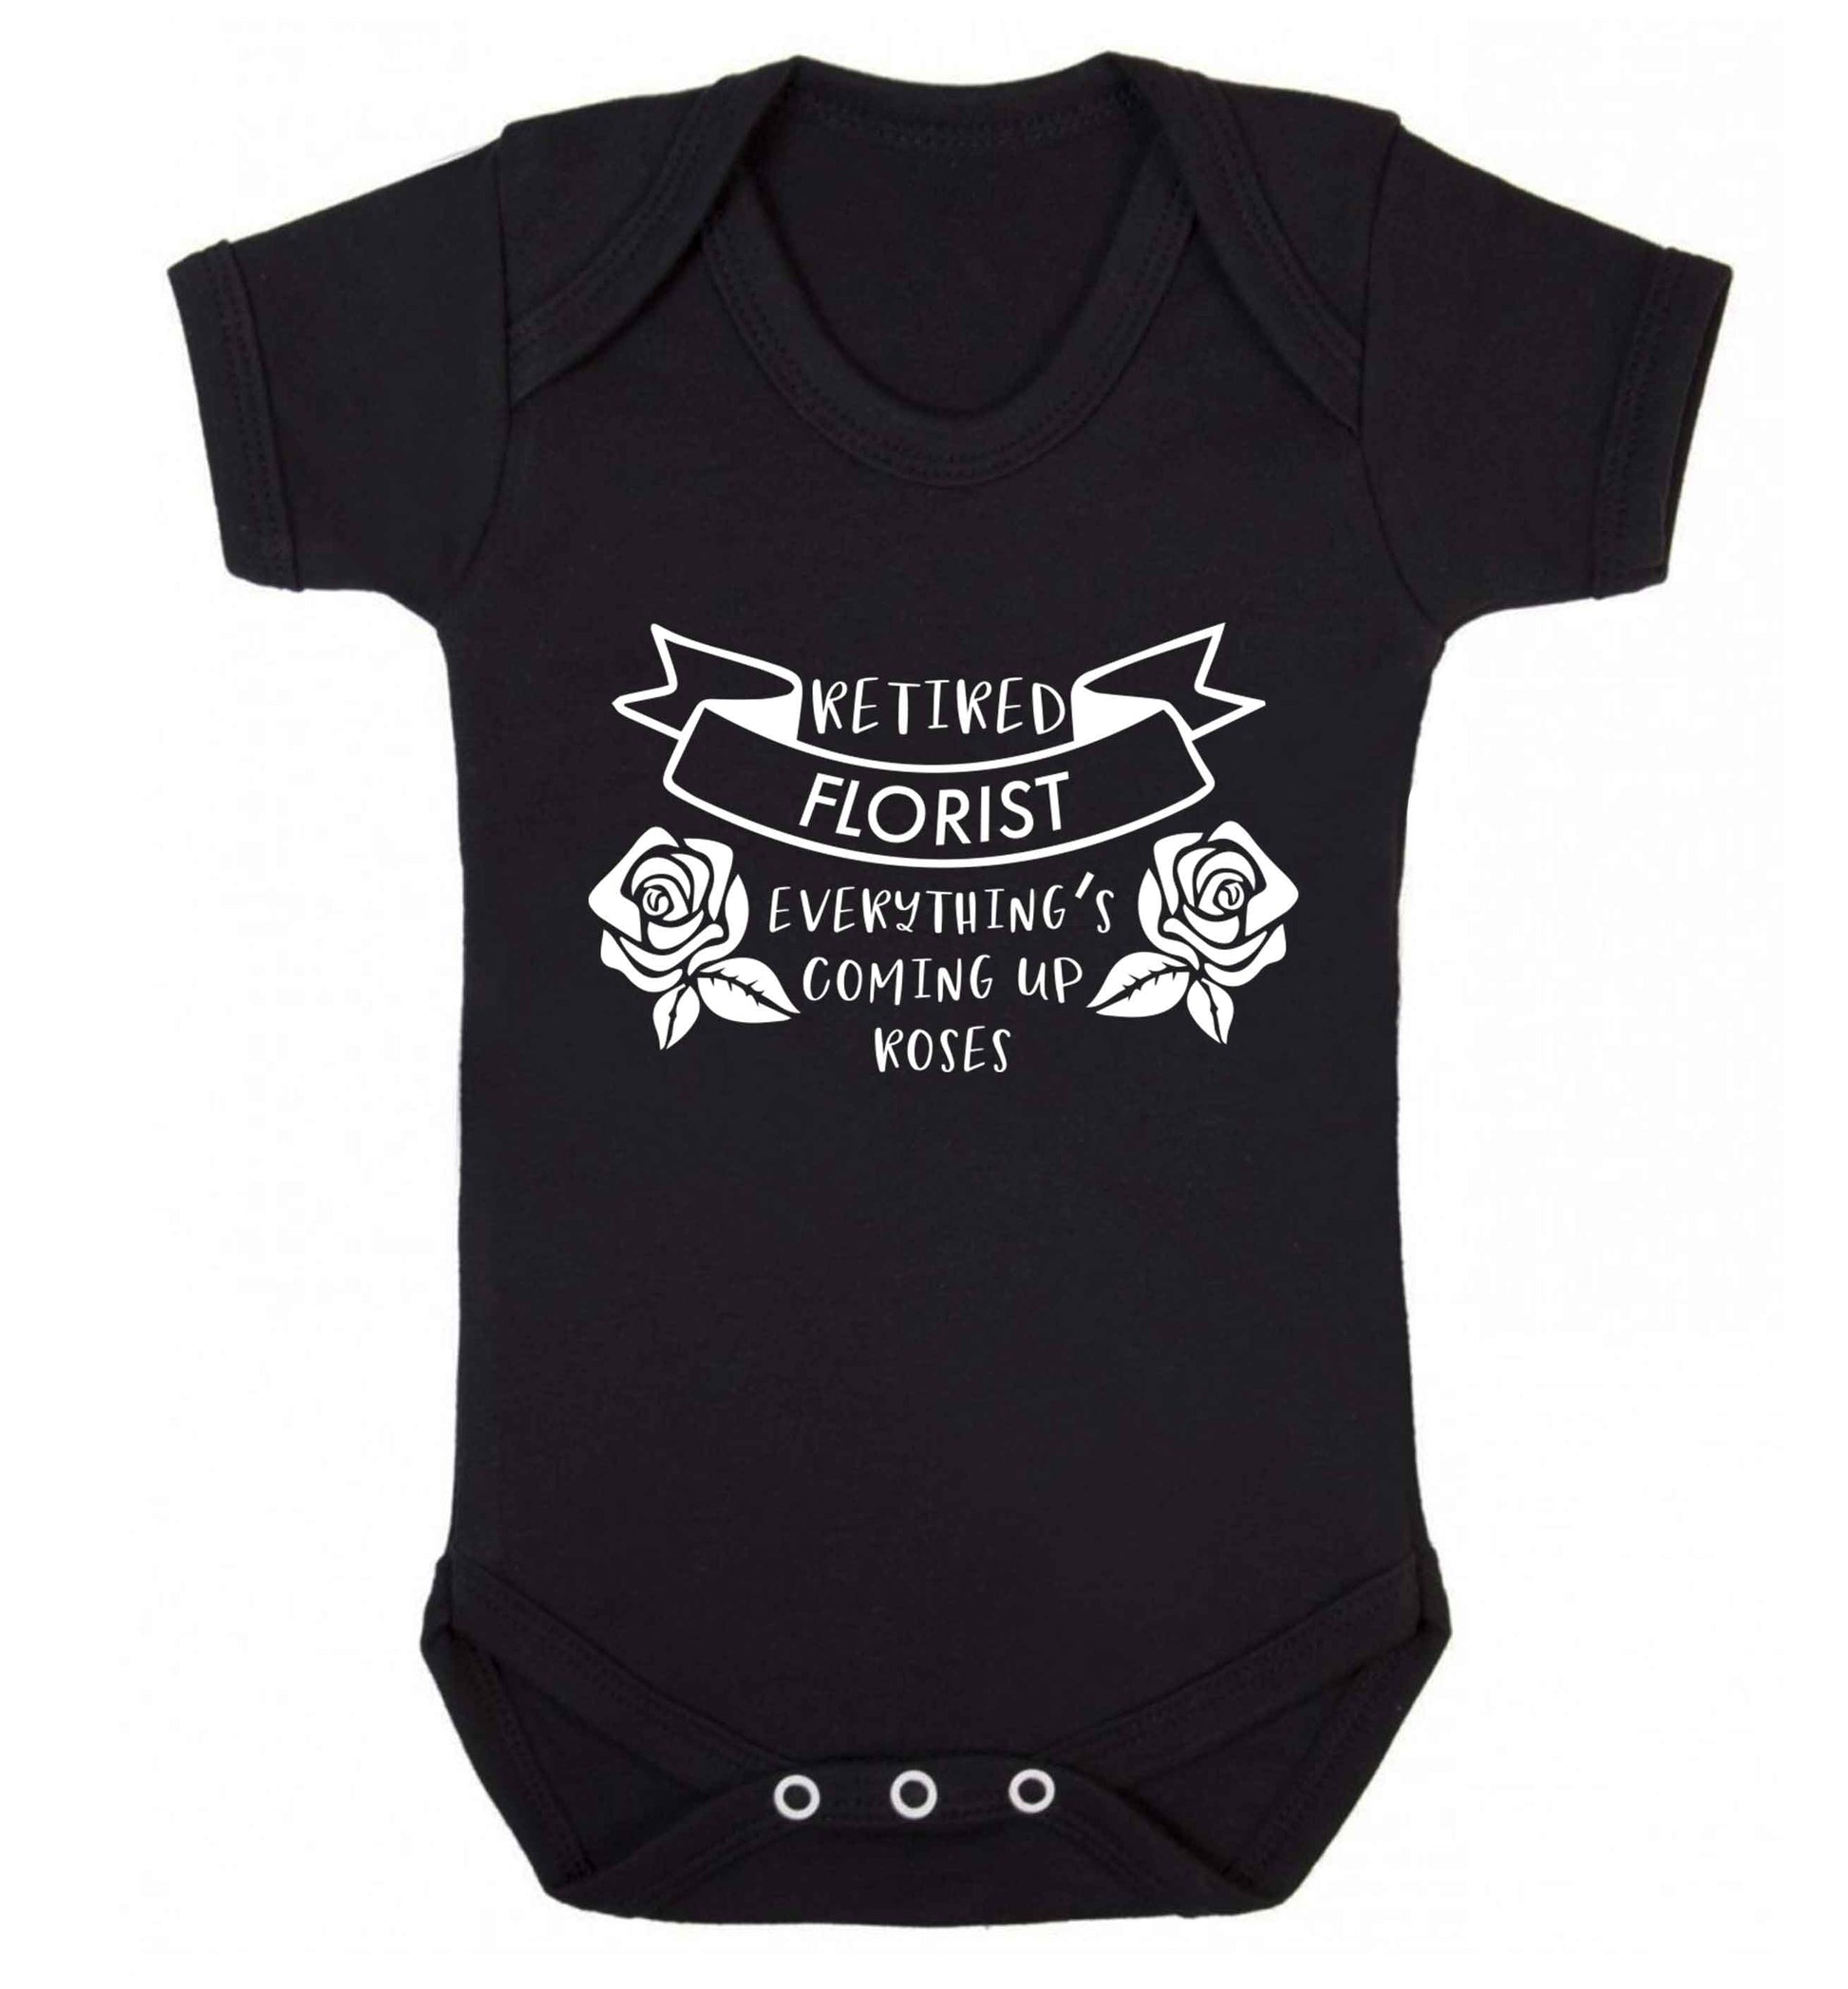 Retired florist everything's coming up roses Baby Vest black 18-24 months